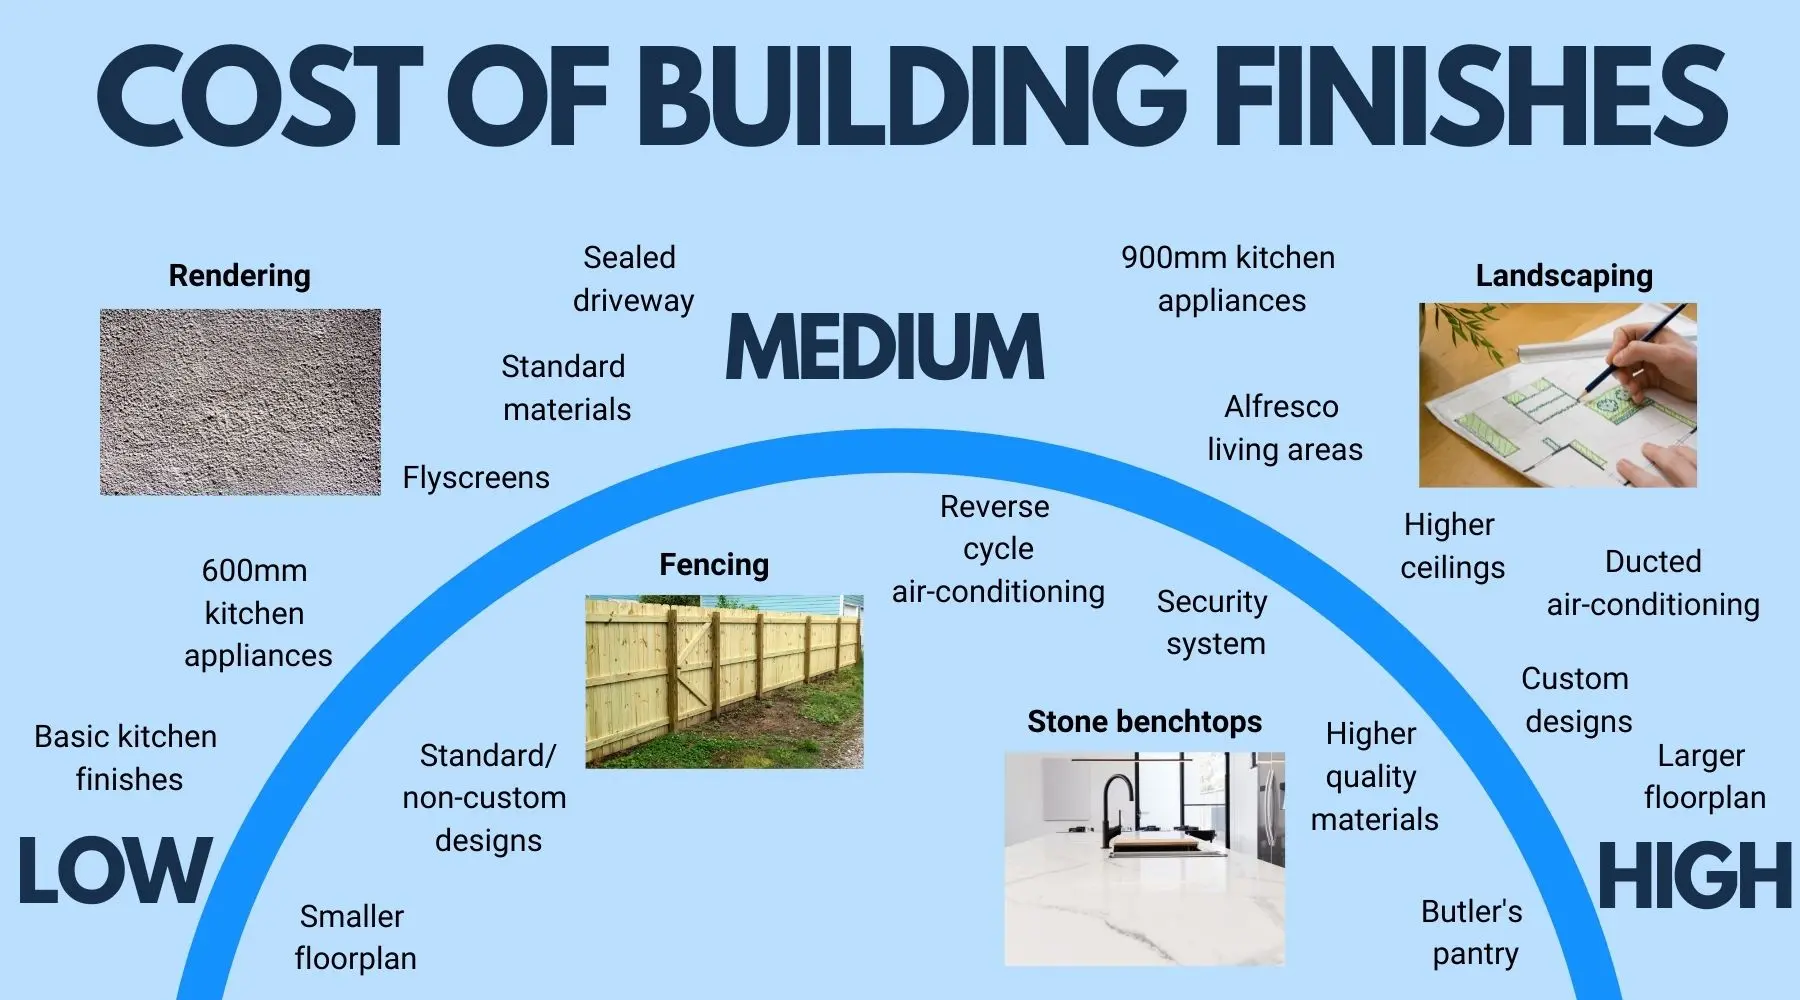 How much does it cost to build a house? Finder